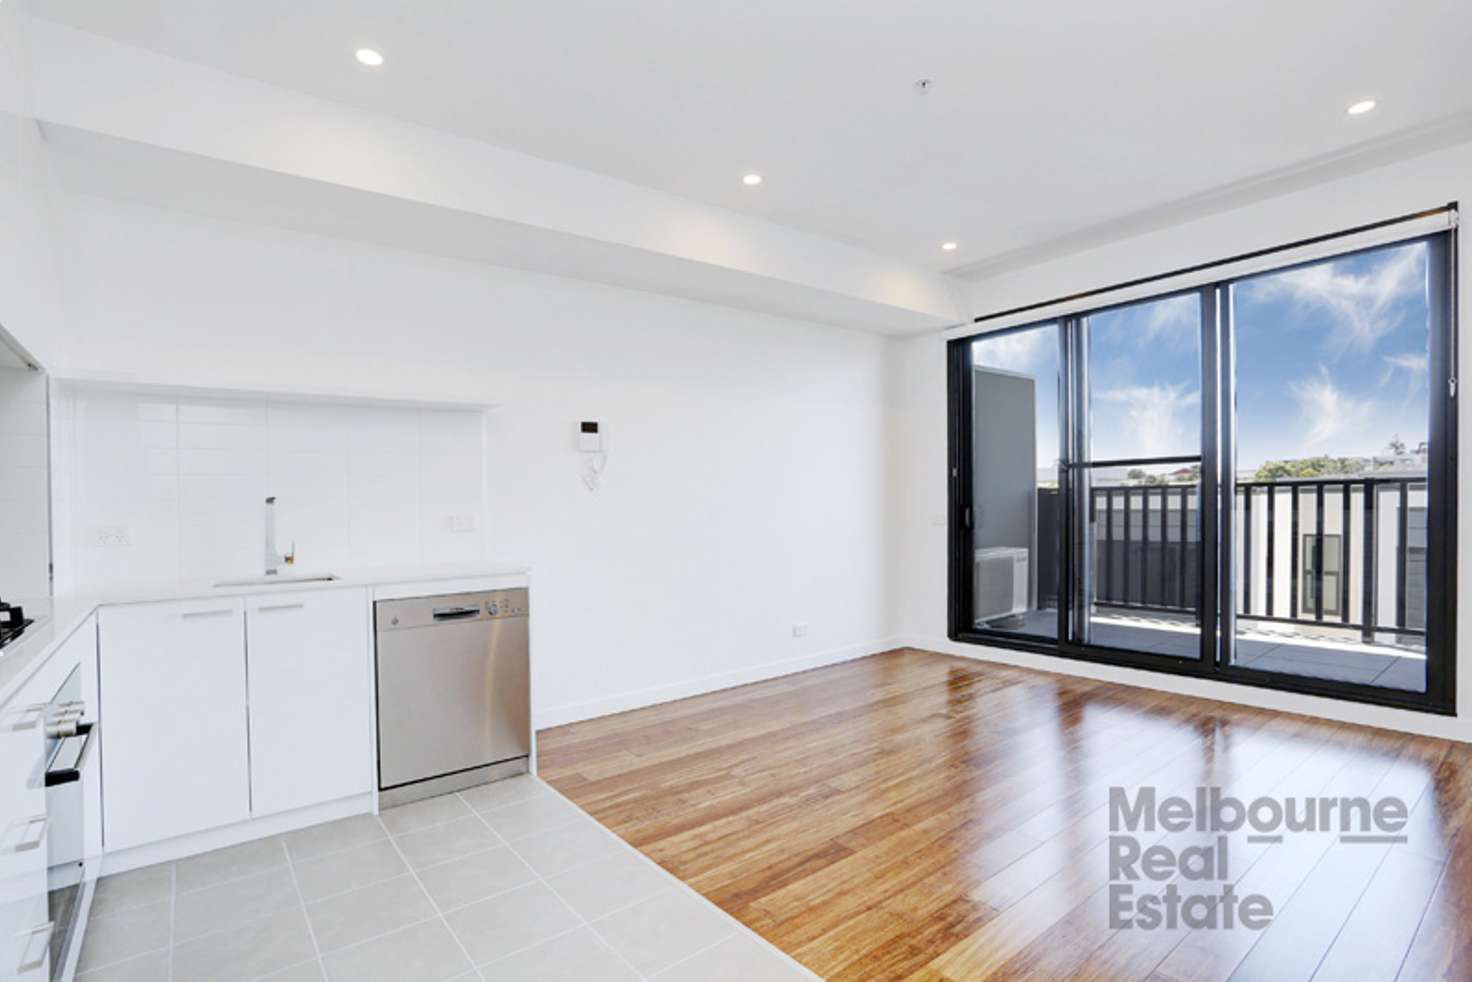 Main view of Homely apartment listing, 415/8 Olive York Way, Brunswick West VIC 3055